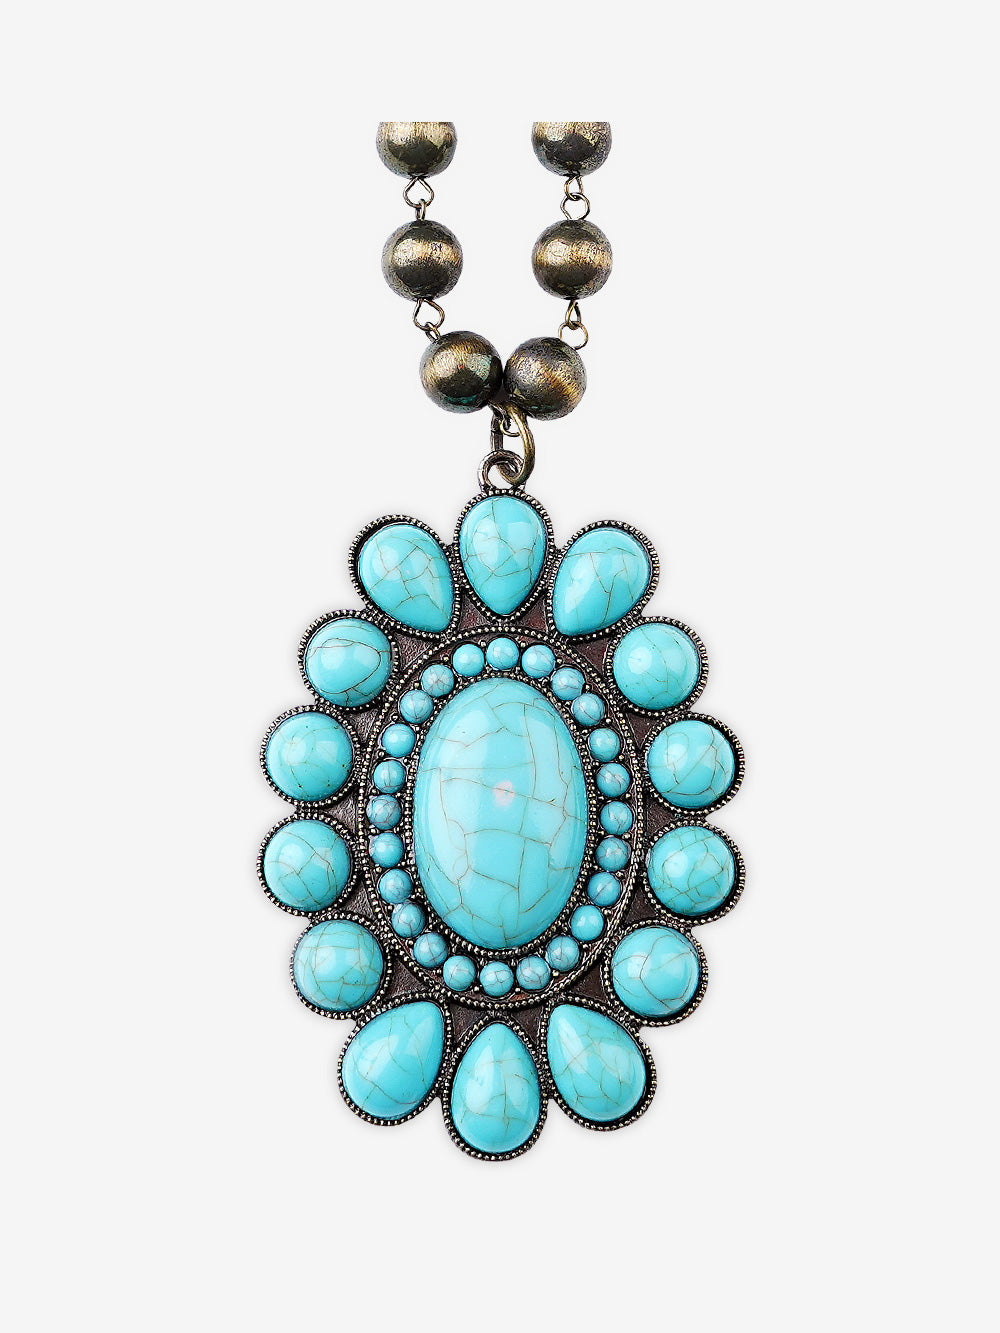 Montana West Revolving Teardrops Turquoise Necklace - Montana West World